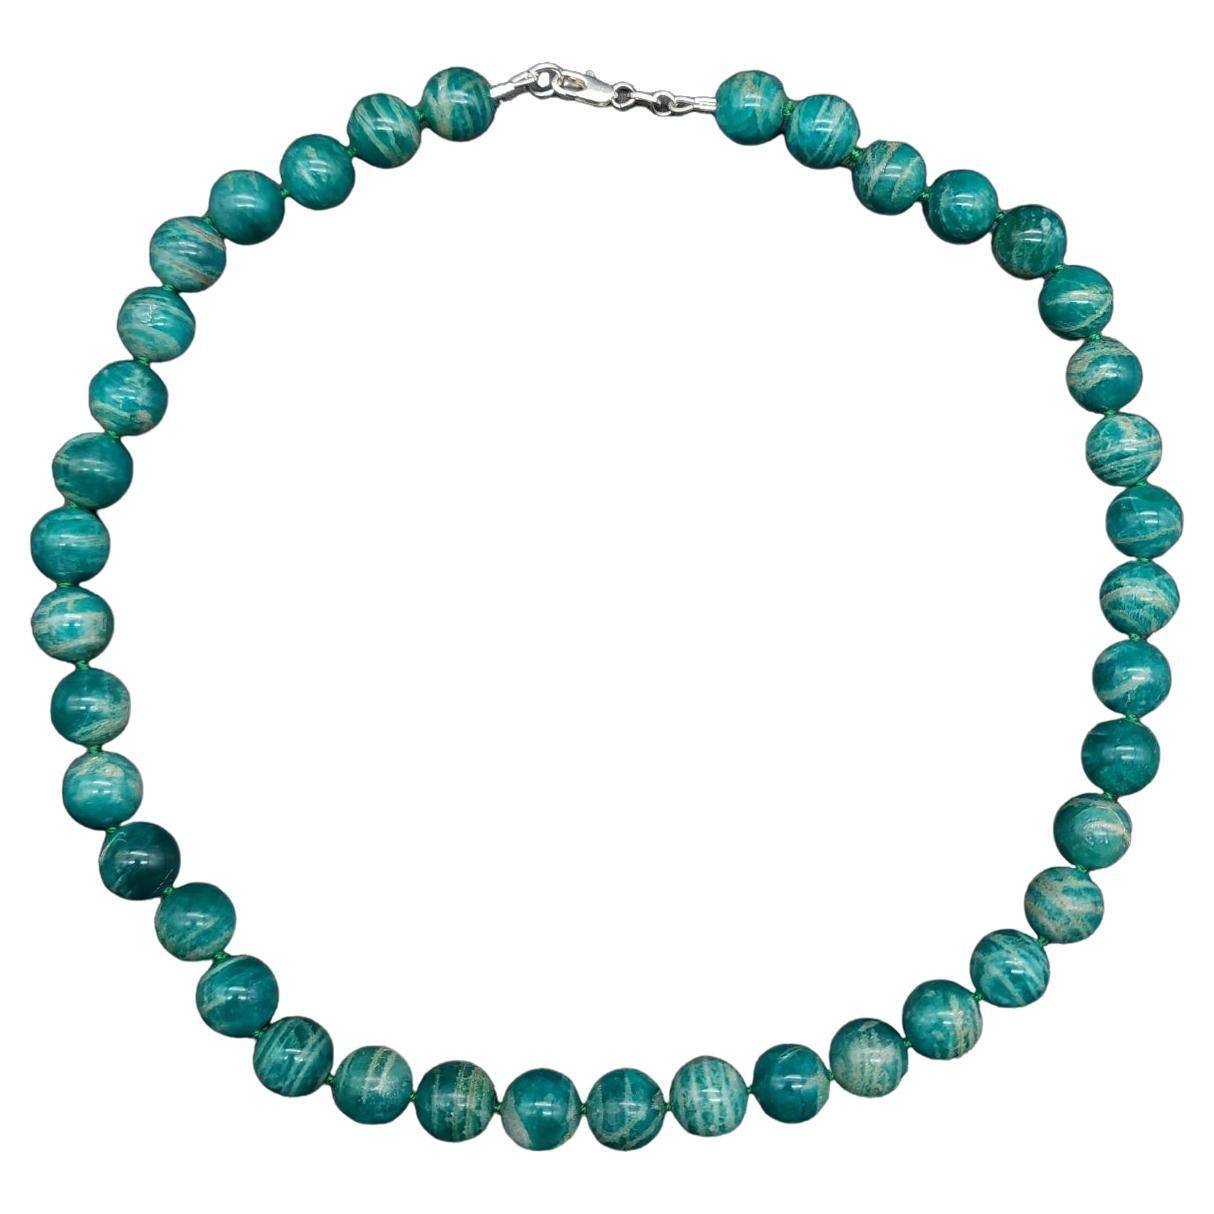 Polished Amazonite Bead Necklace, Sterling Silver Clasp, Vintage, Collar